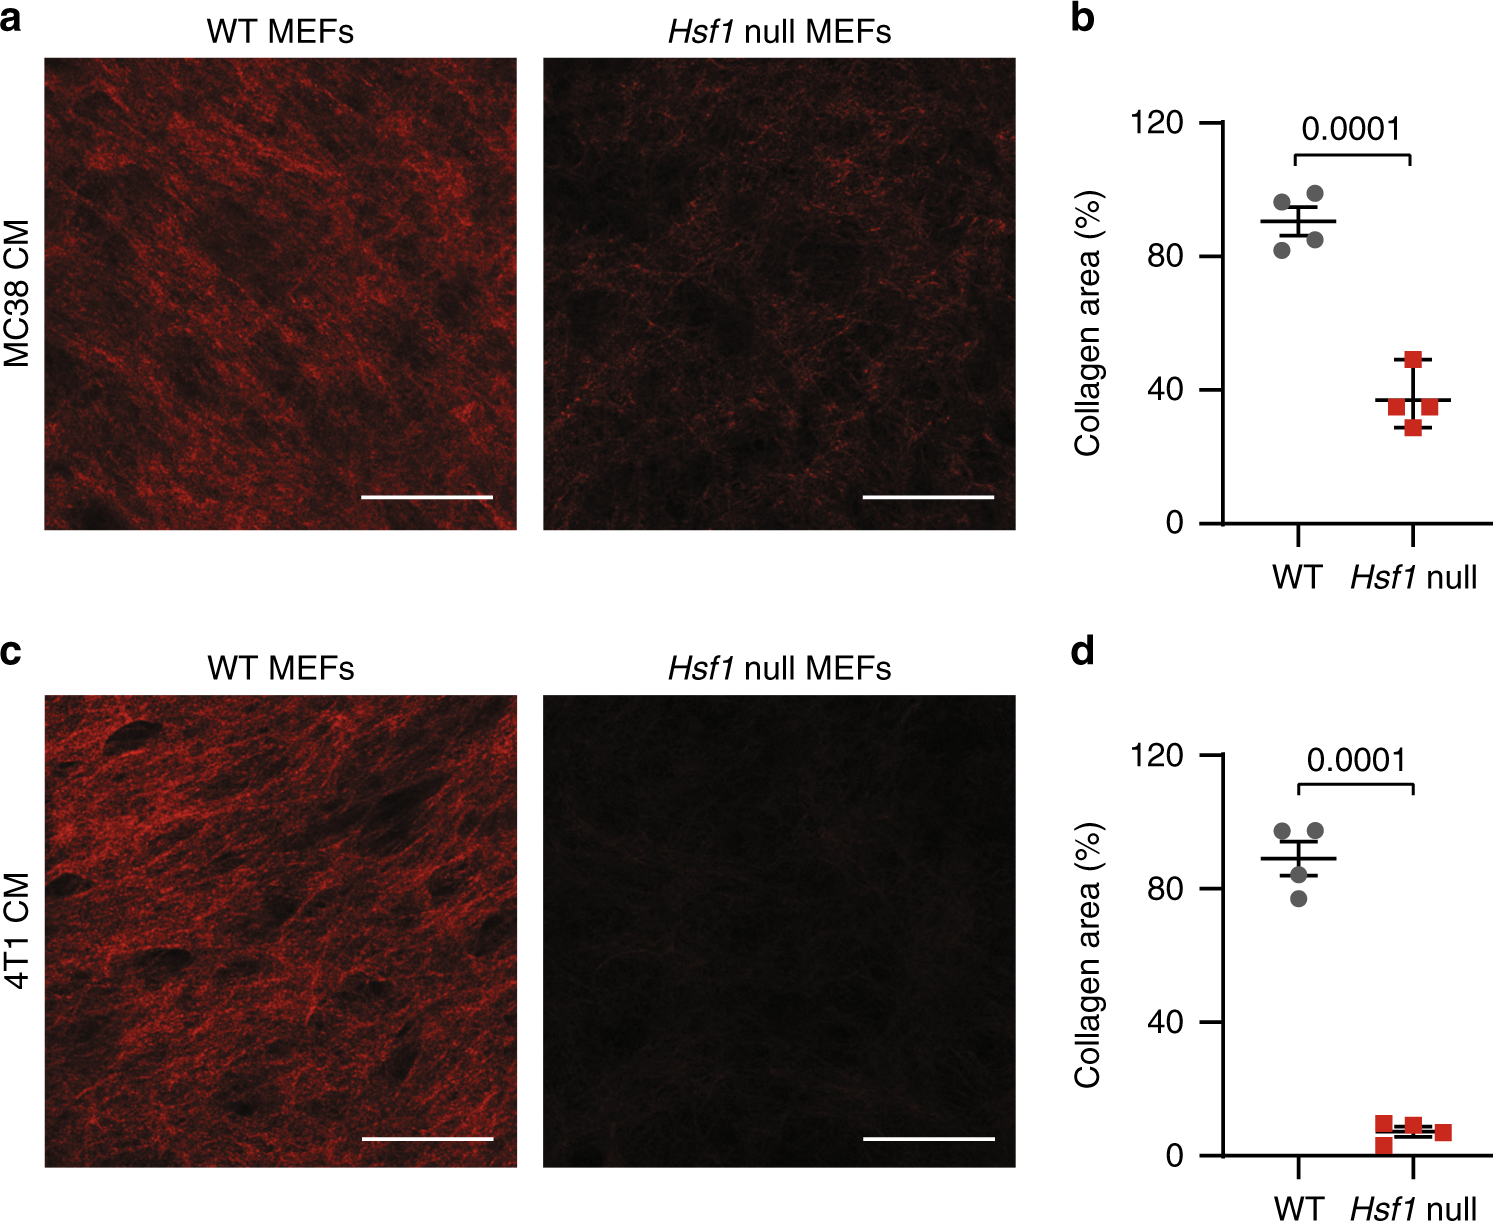 Heat Shock Factor 1 Dependent Extracellular Matrix Remodeling Mediates The Transition From Chronic Intestinal Inflammation To Colon Cancer Nature Communications